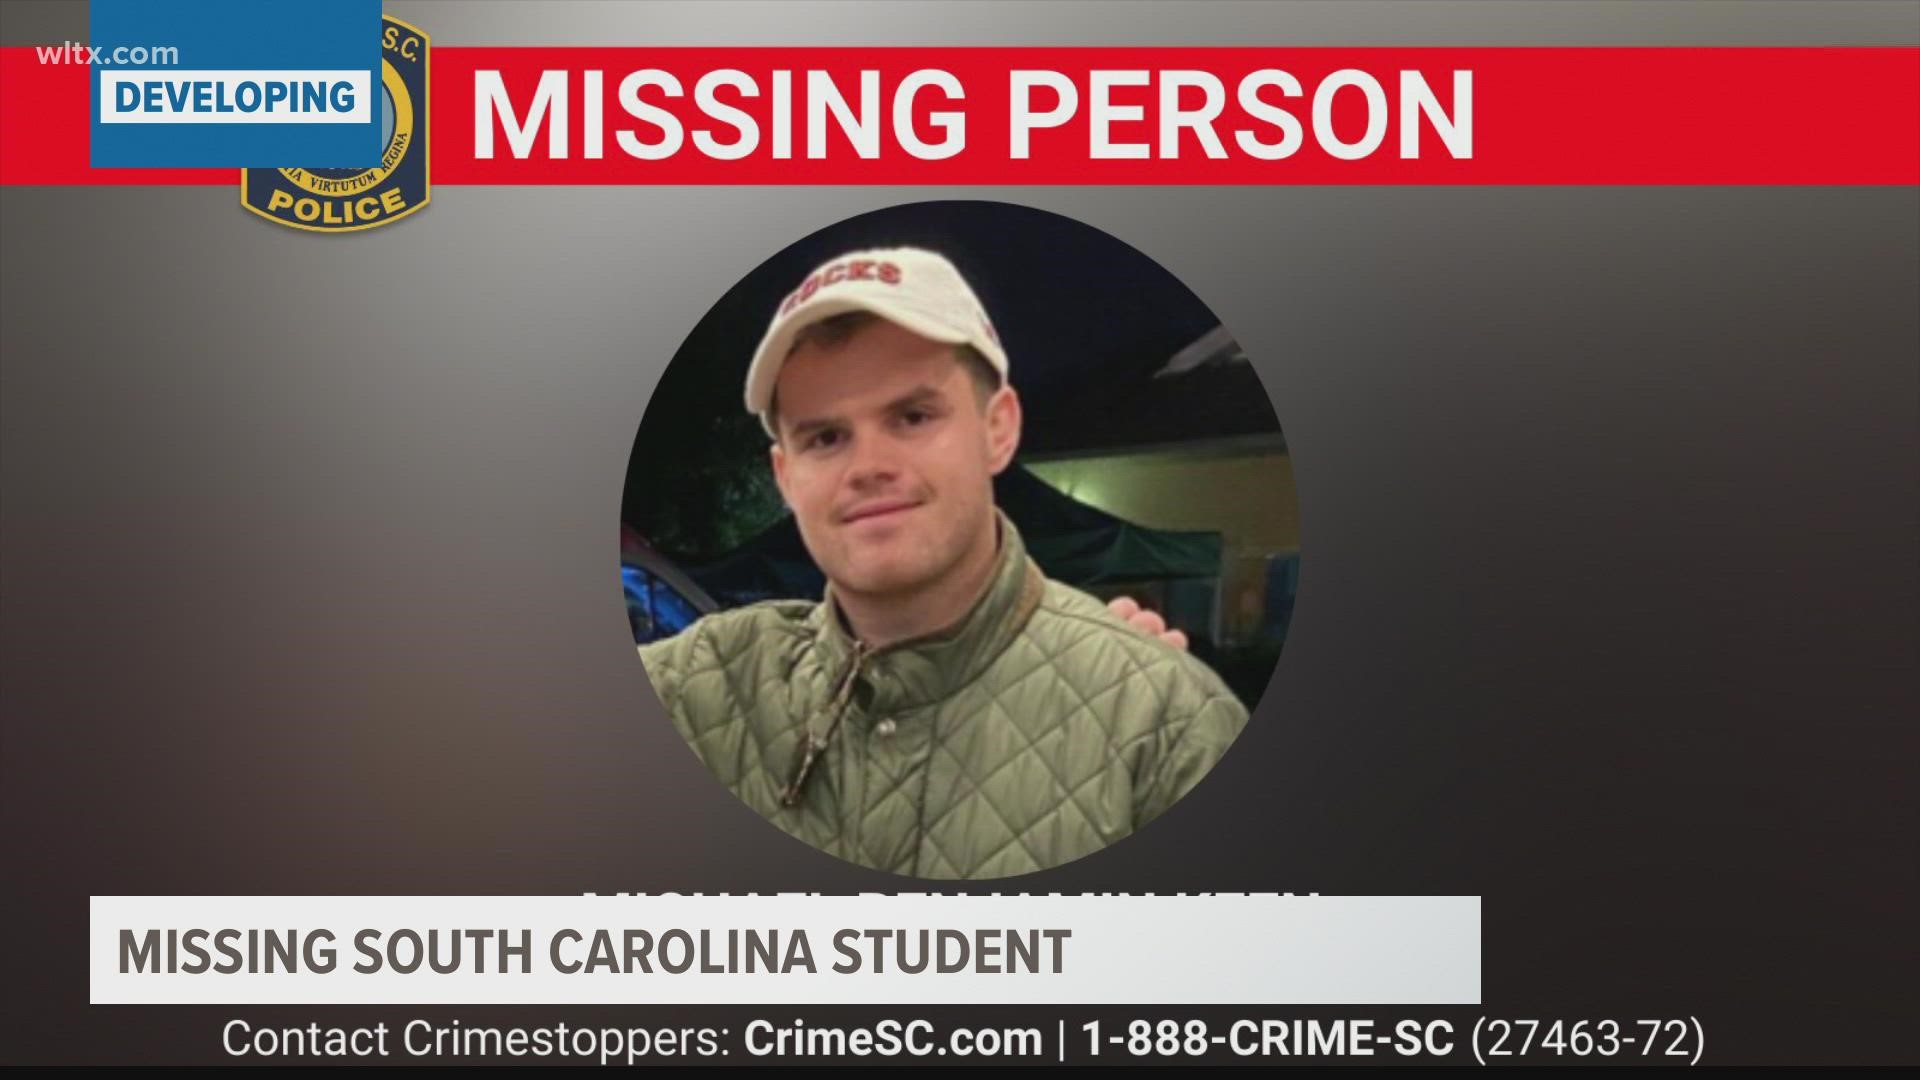 Officers are trying to locate 22-year-old Michael Benjamin Keen. Keen is a senior majoring in finance at the school.